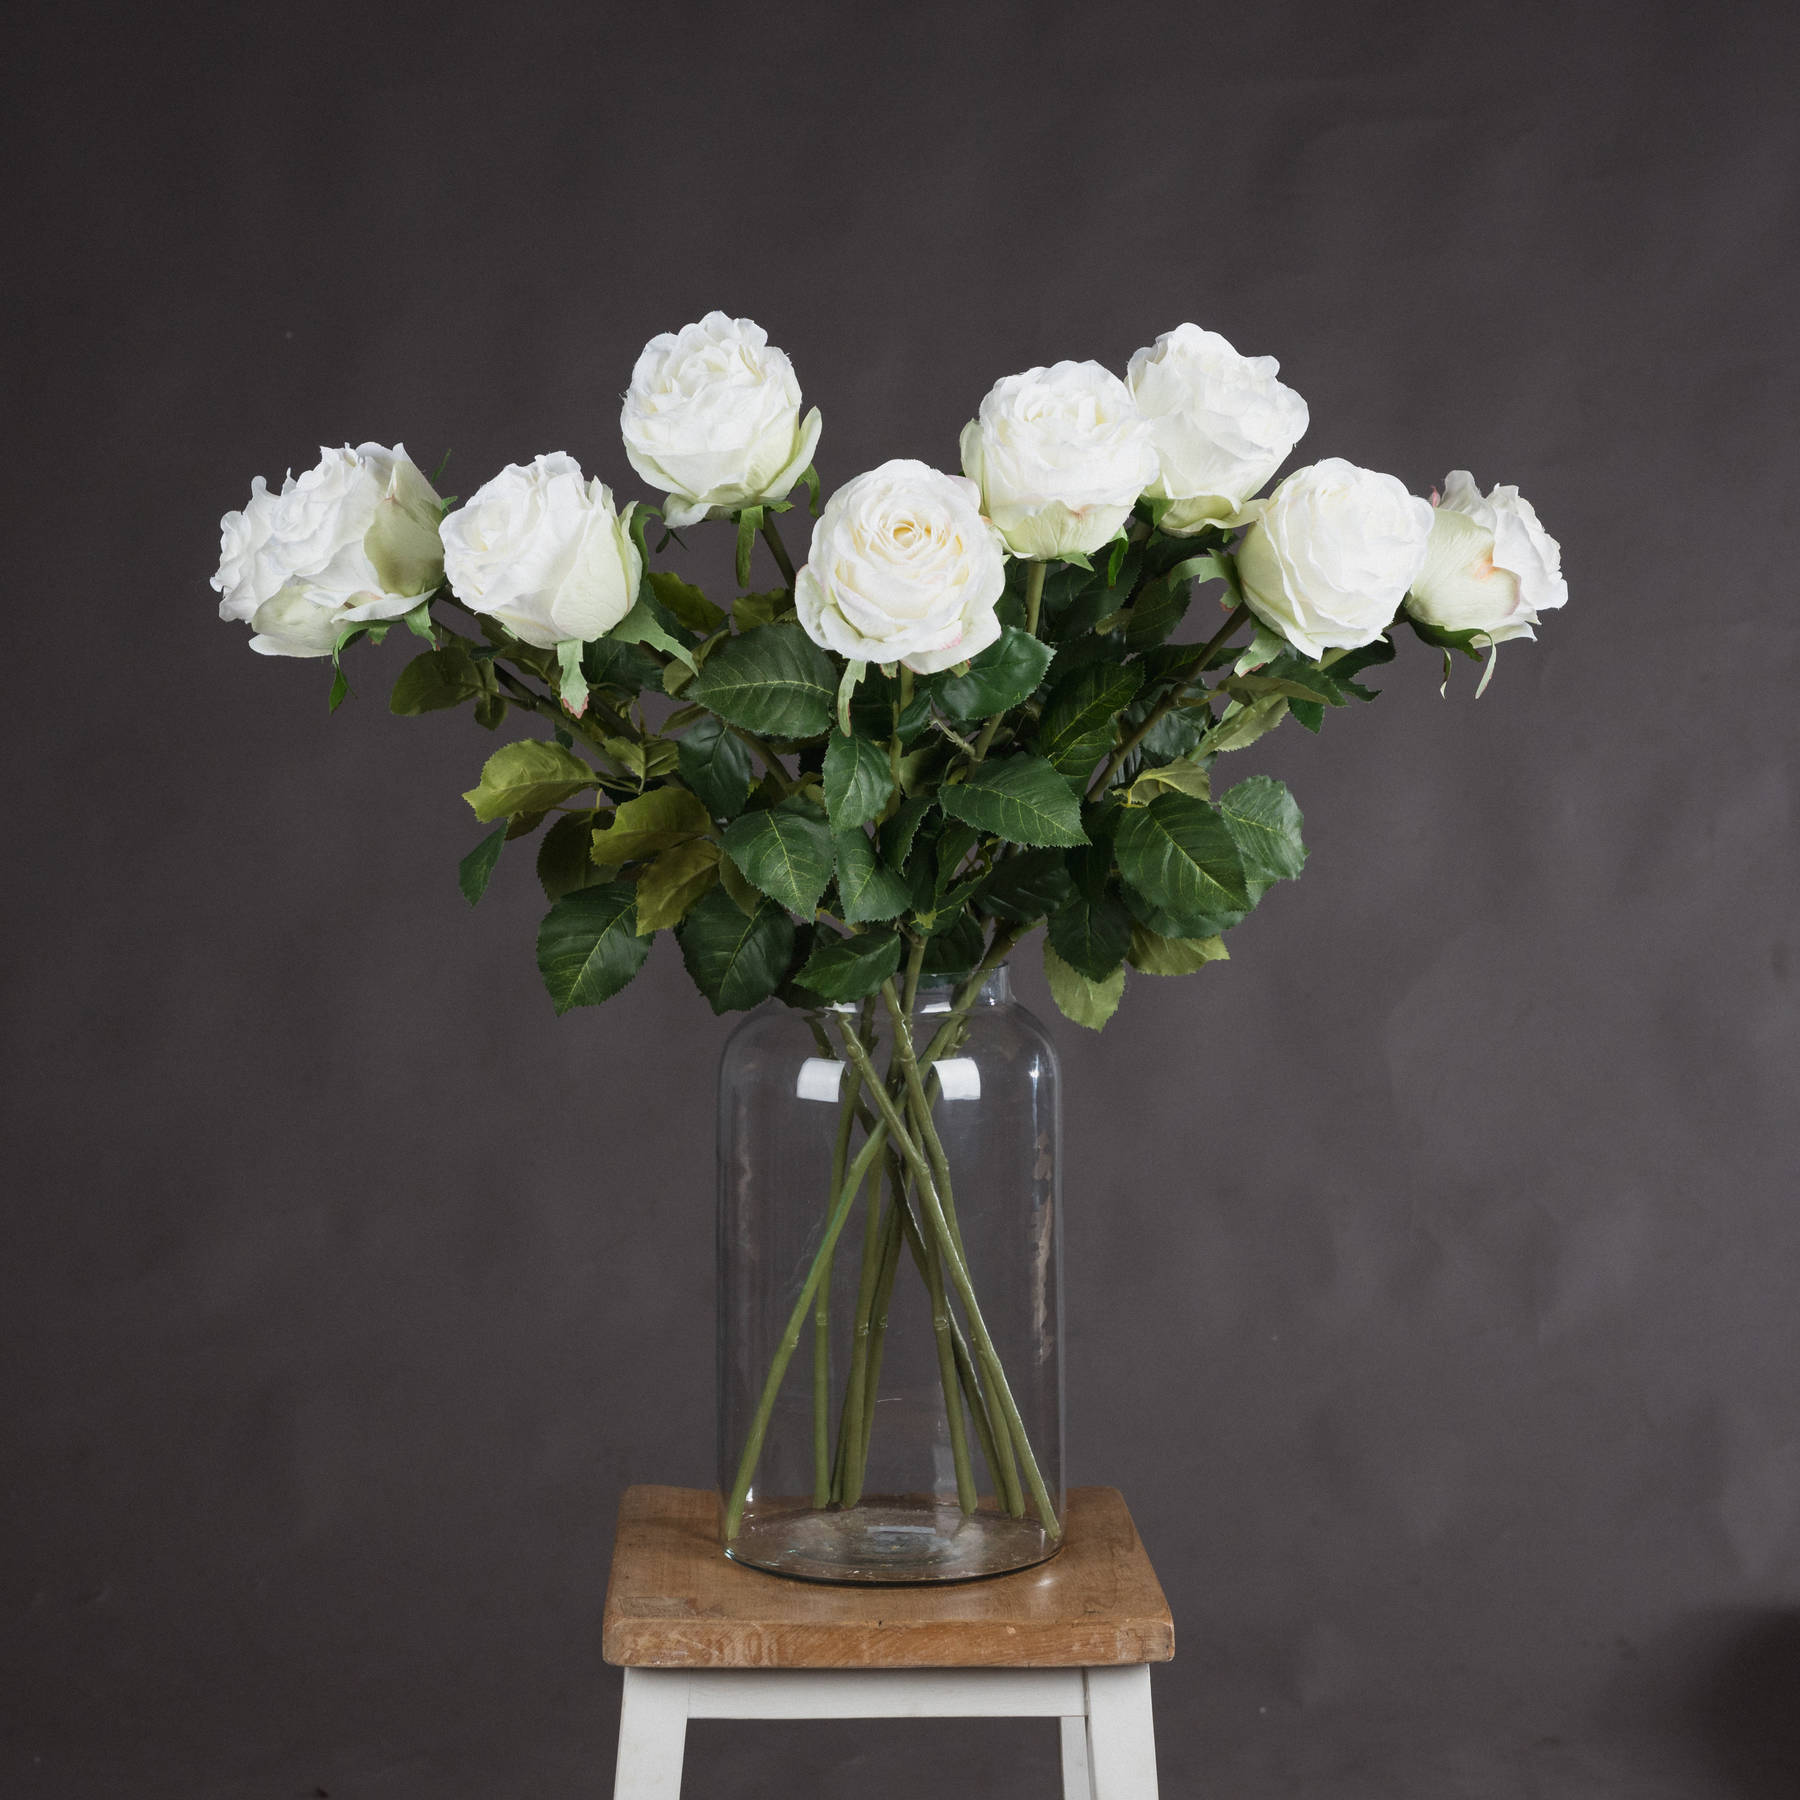 Traditional White Rose - Image 1